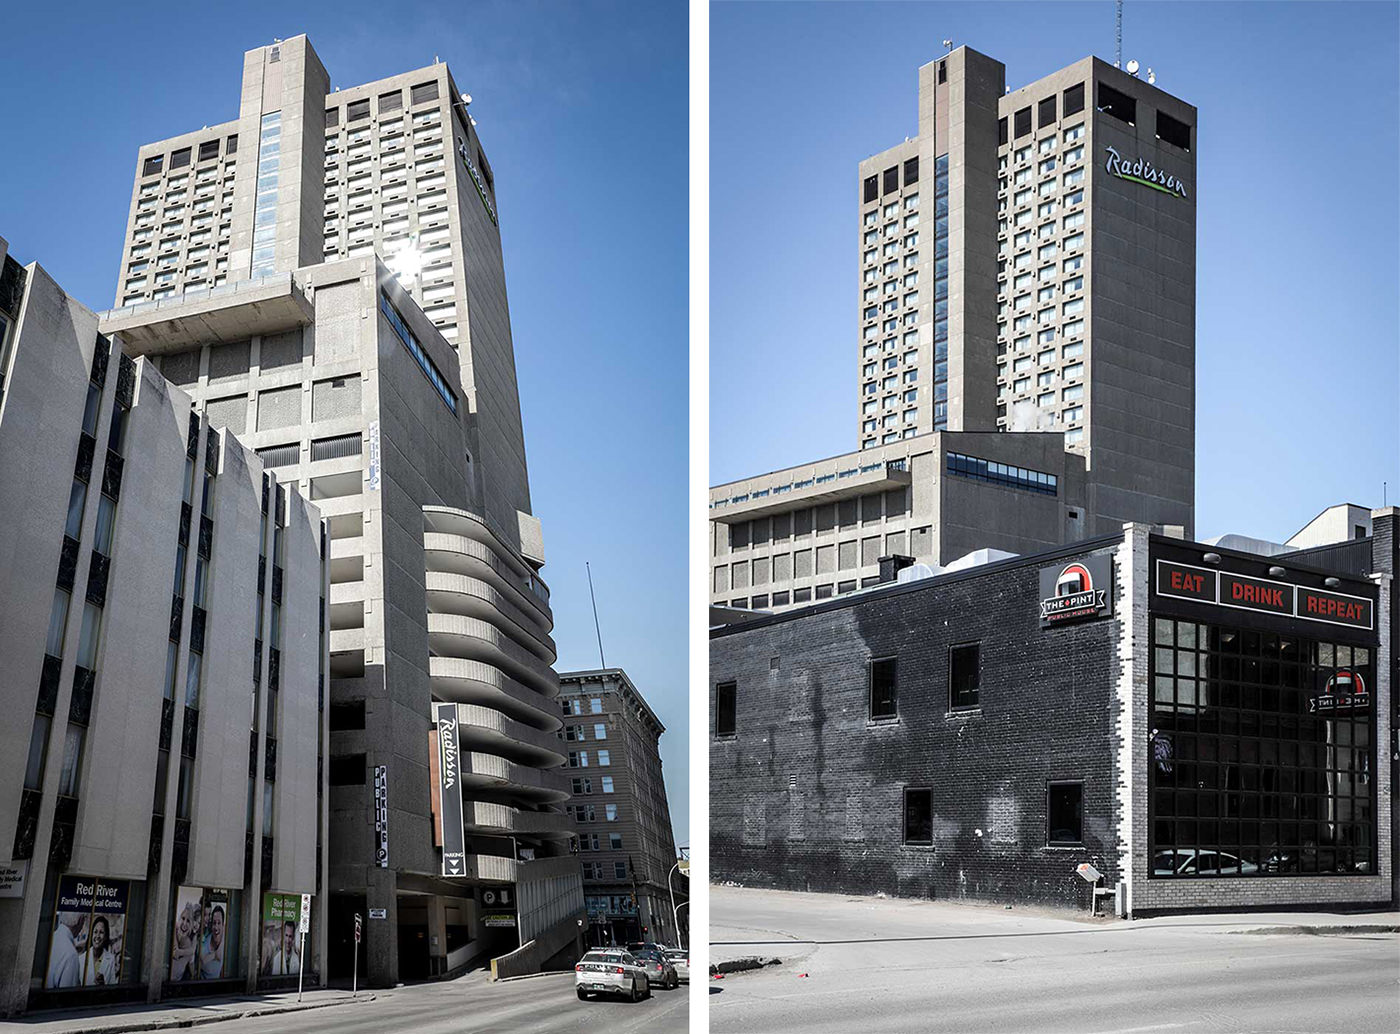 Radisson Hotel (formerly the Northstar Hotel) on Portage Ave, Winnipeg. Waisman Ross Blankstein Coop Gillmor Hanna (now Number Ten Architectural Group), 1971.